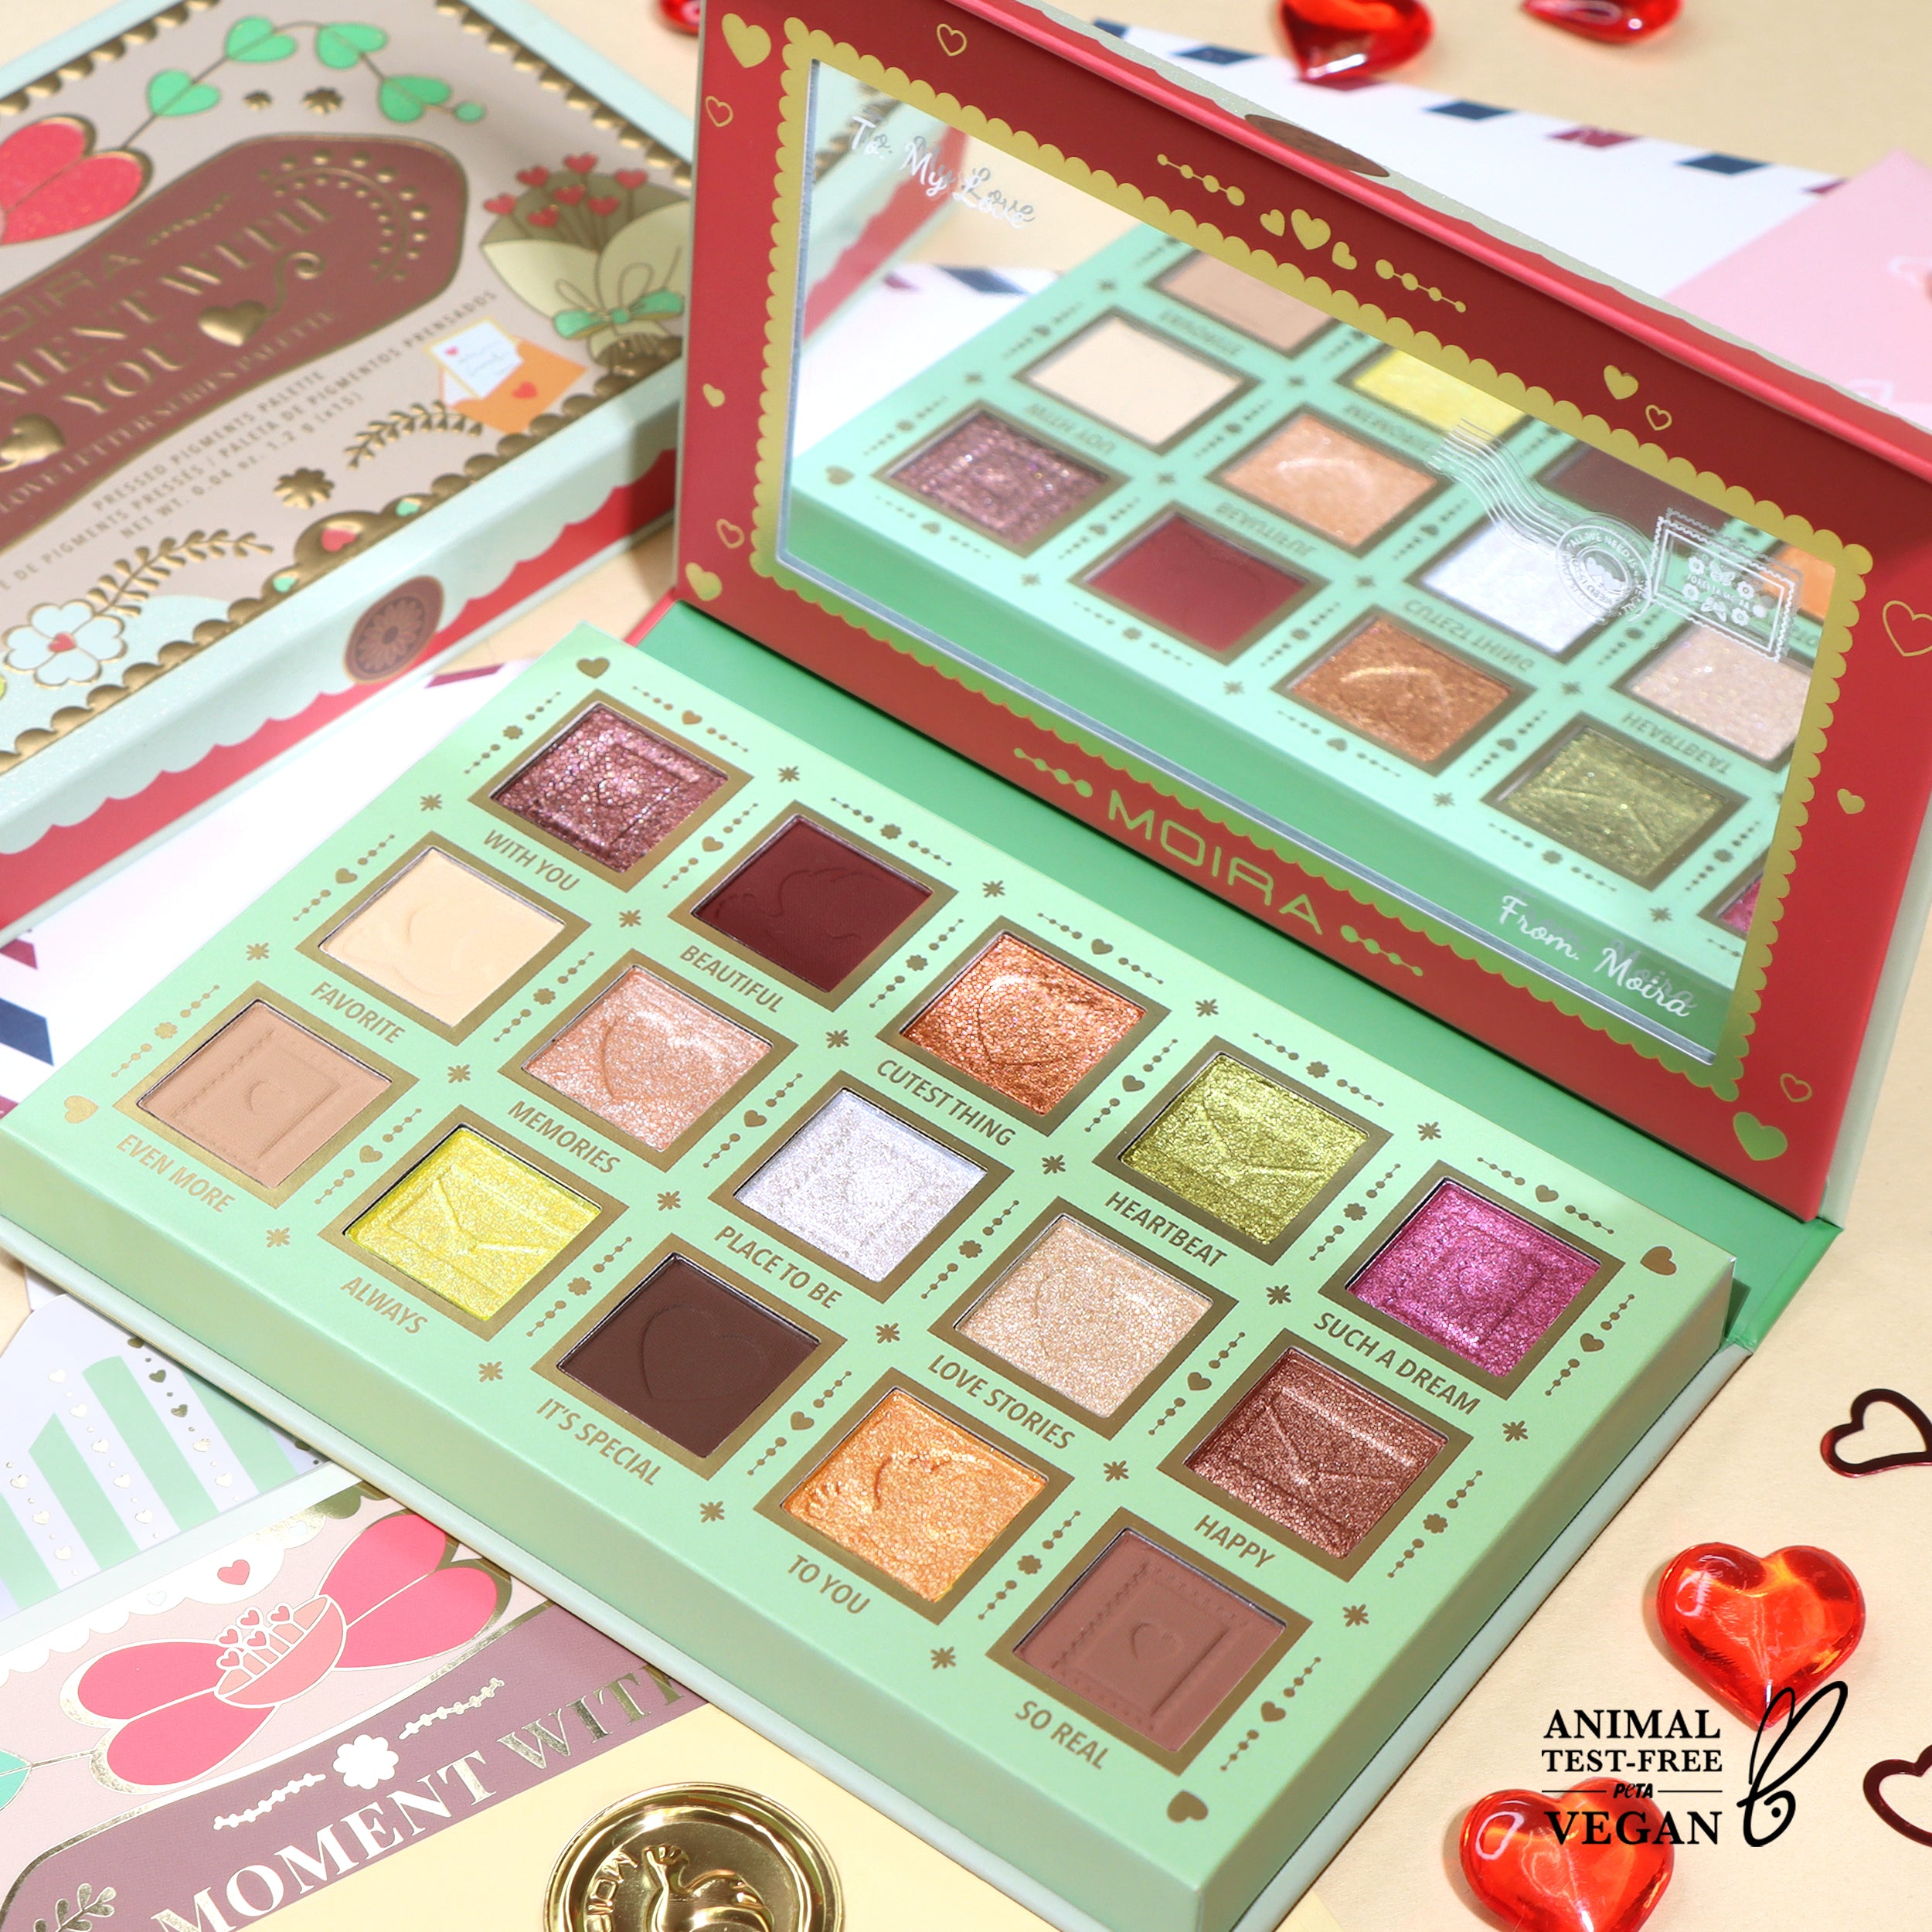 A Moment With You Palette